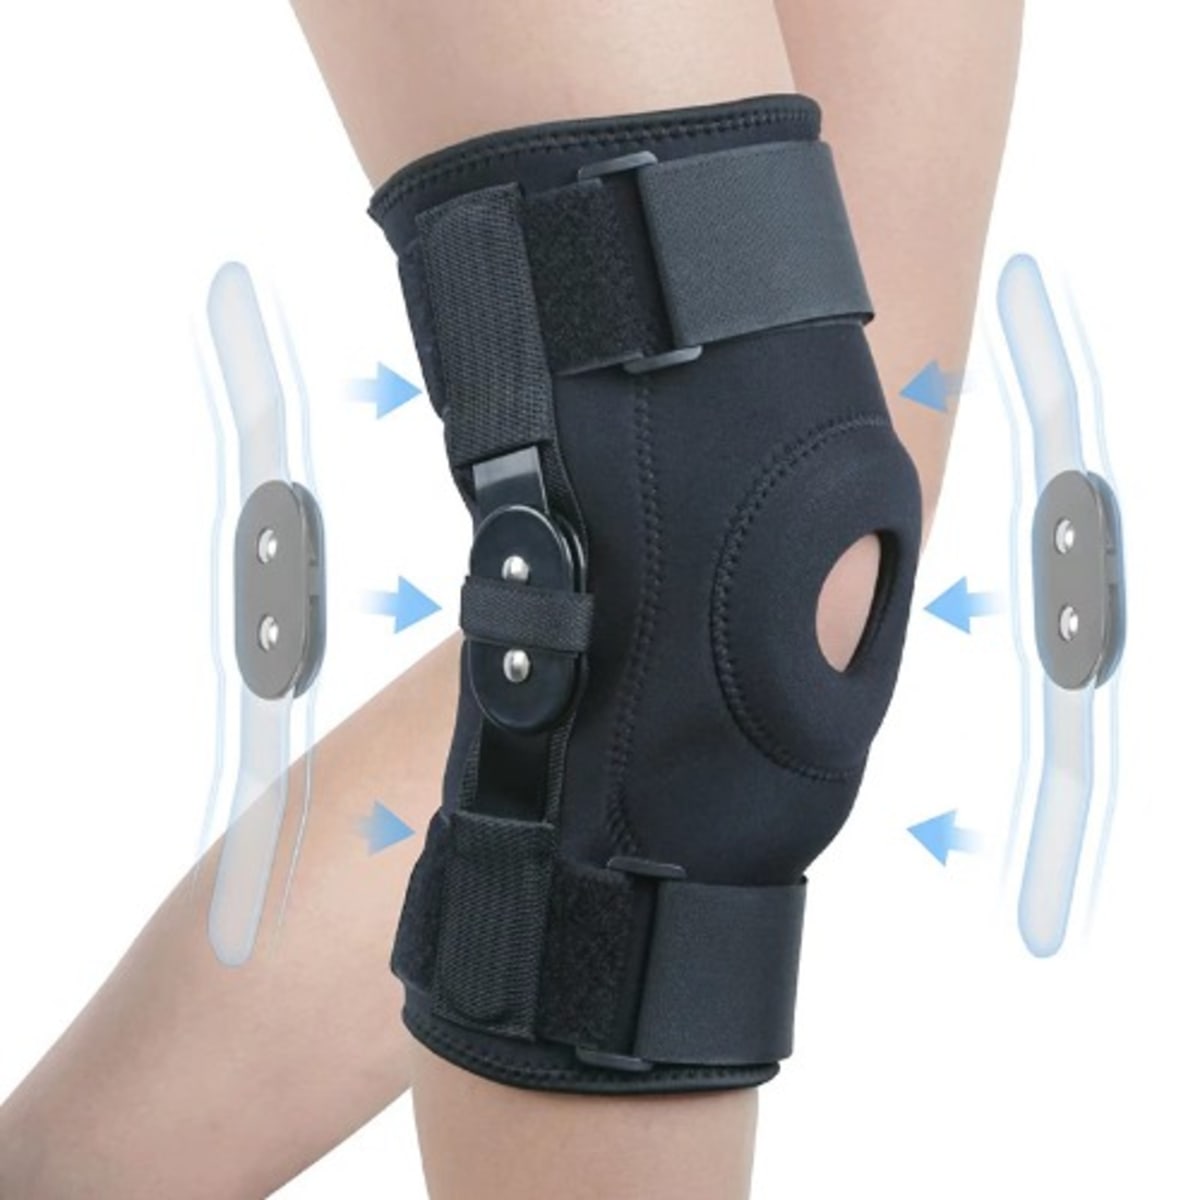 Knee Brace With Stabilizers -Adjustable Compression Support